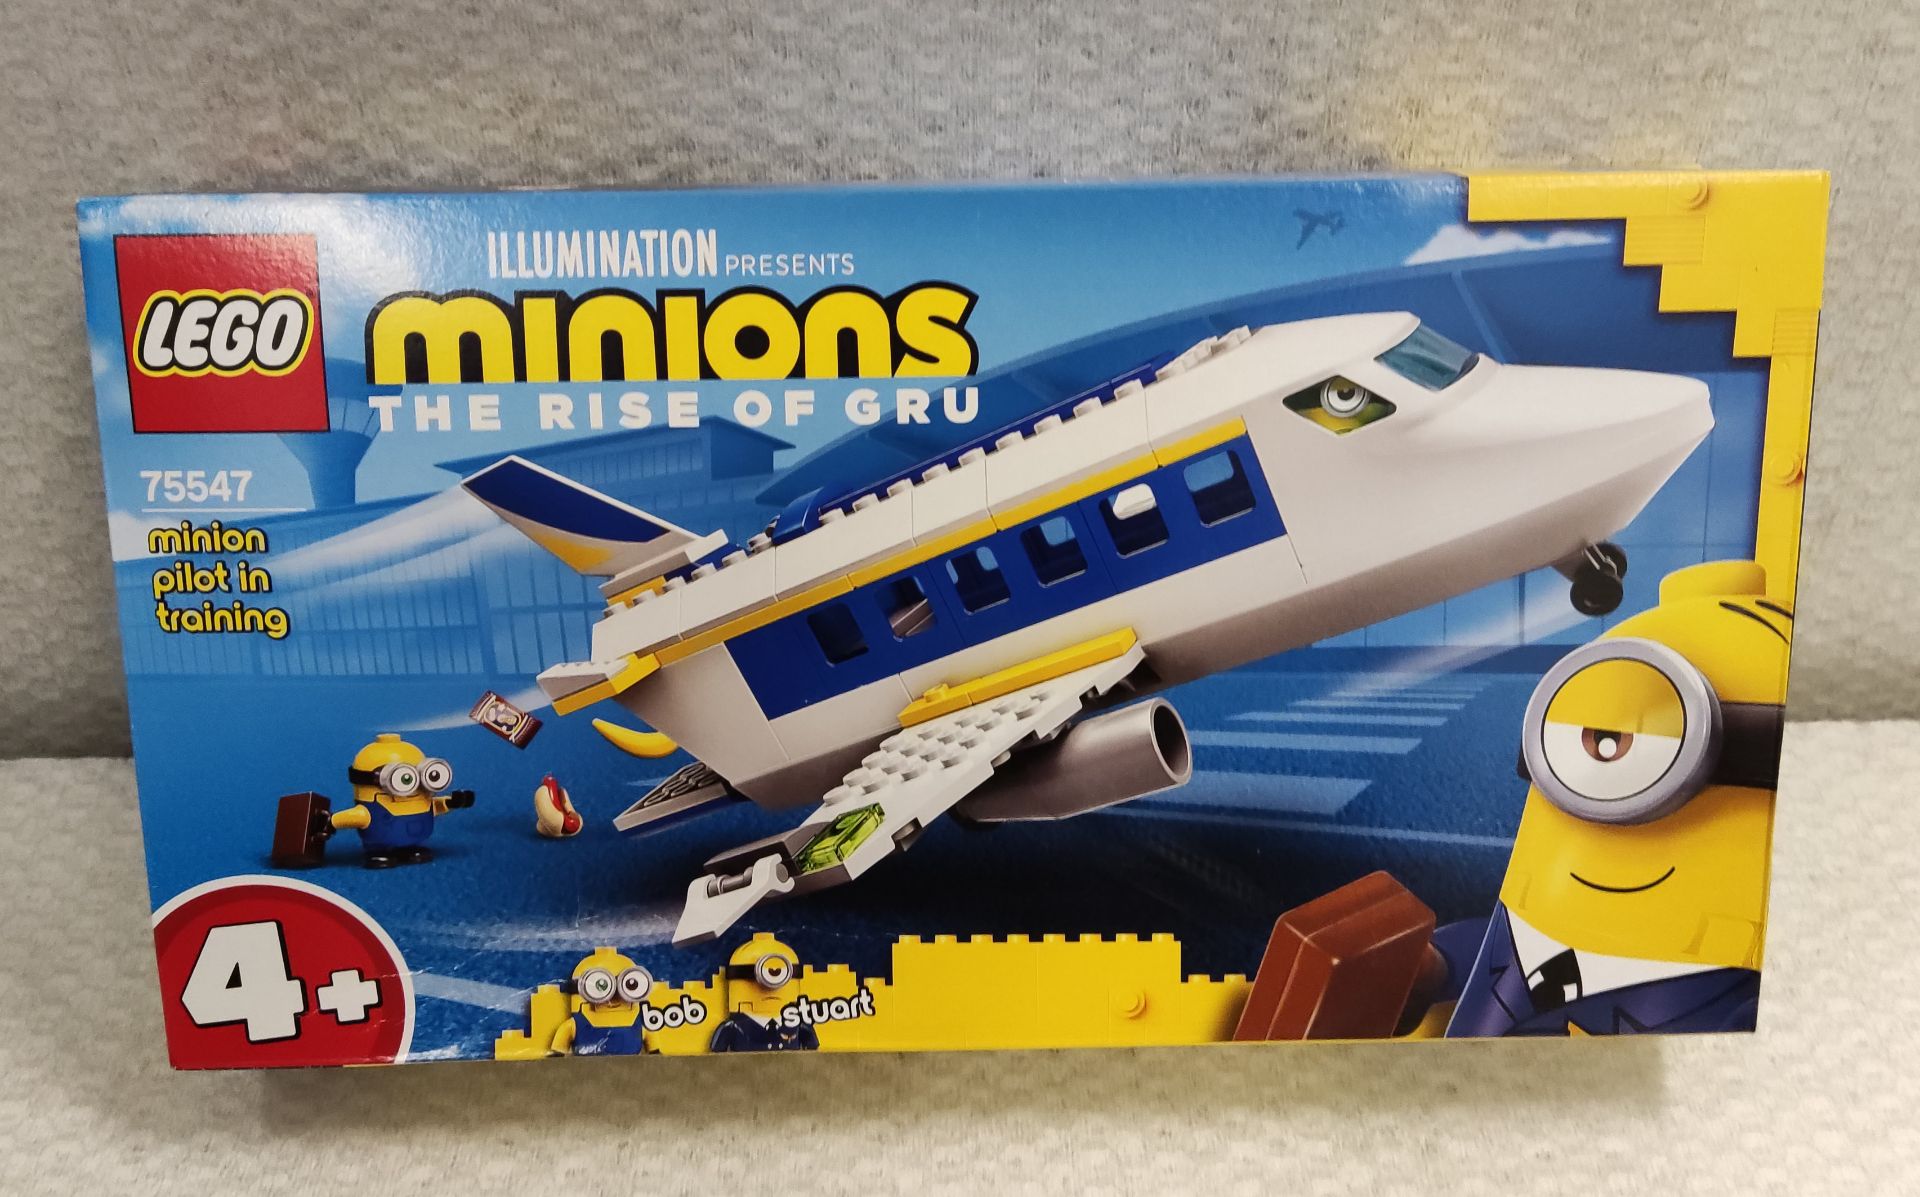 1 x Lego Minions The Rise Of Gru Minion Pilot In Training - Model 75547 - New/Boxed - Image 2 of 7